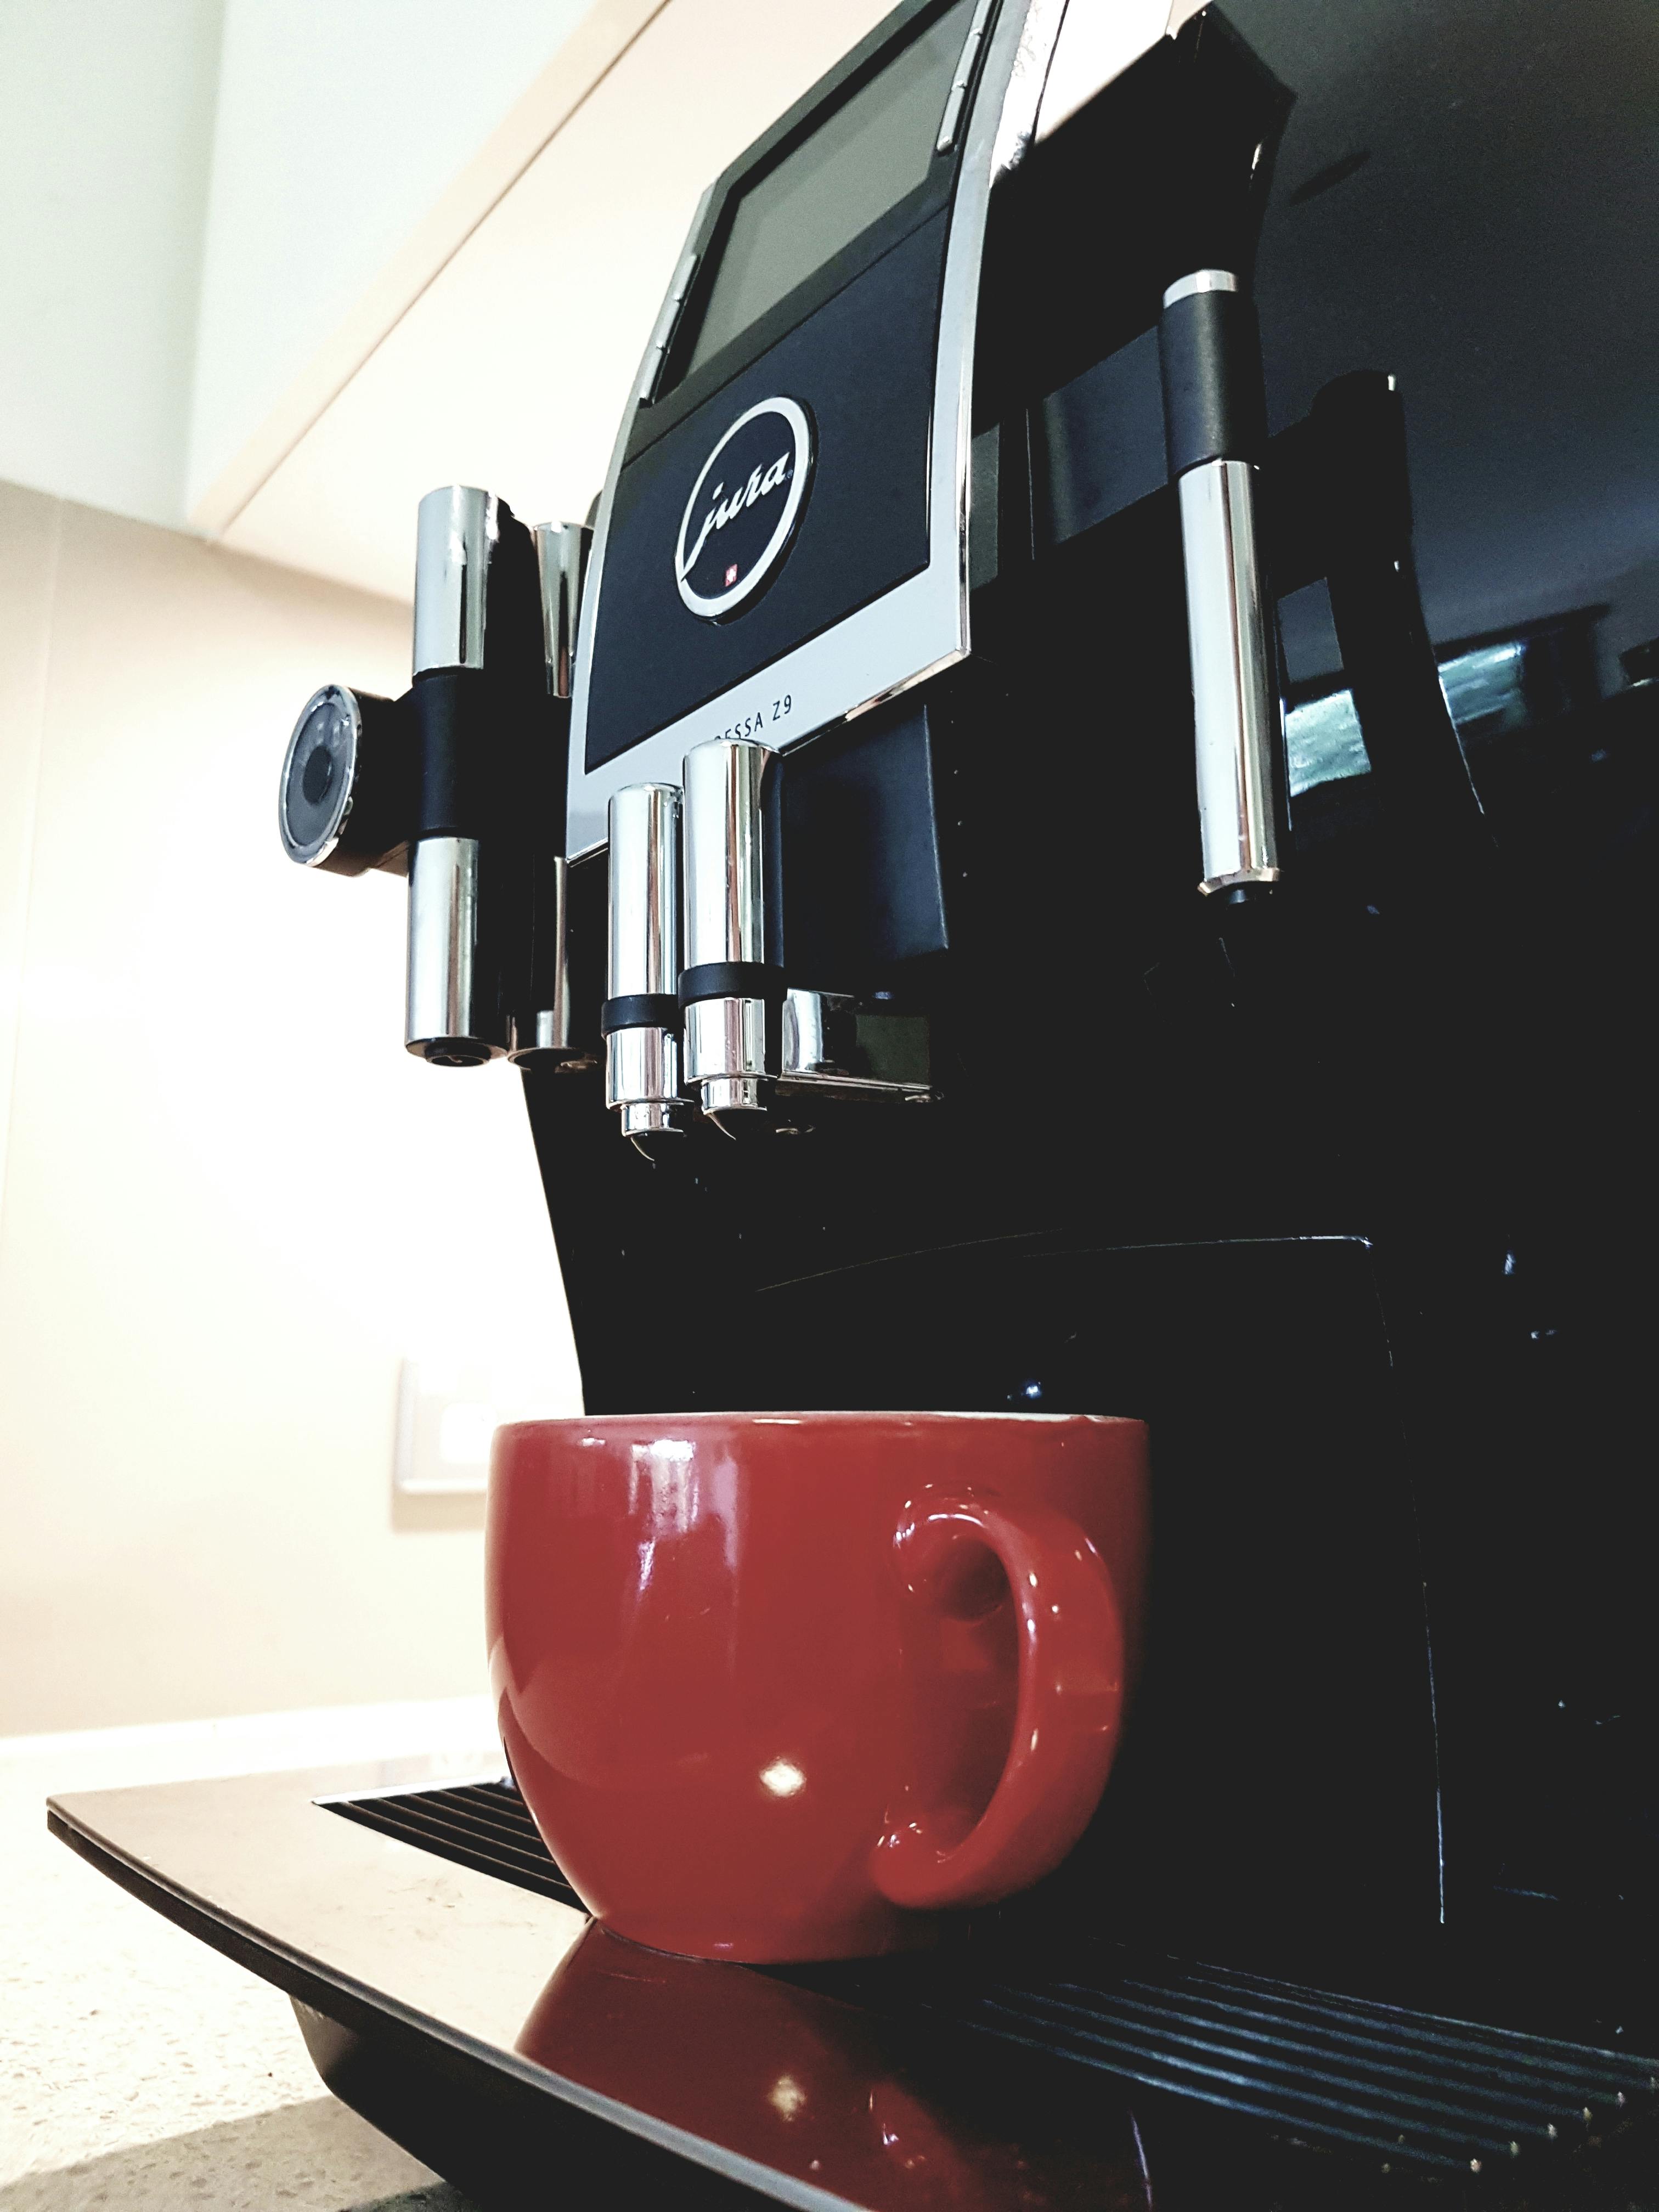 A coffeemaker with a mug reader to be filled | Source: Pexels